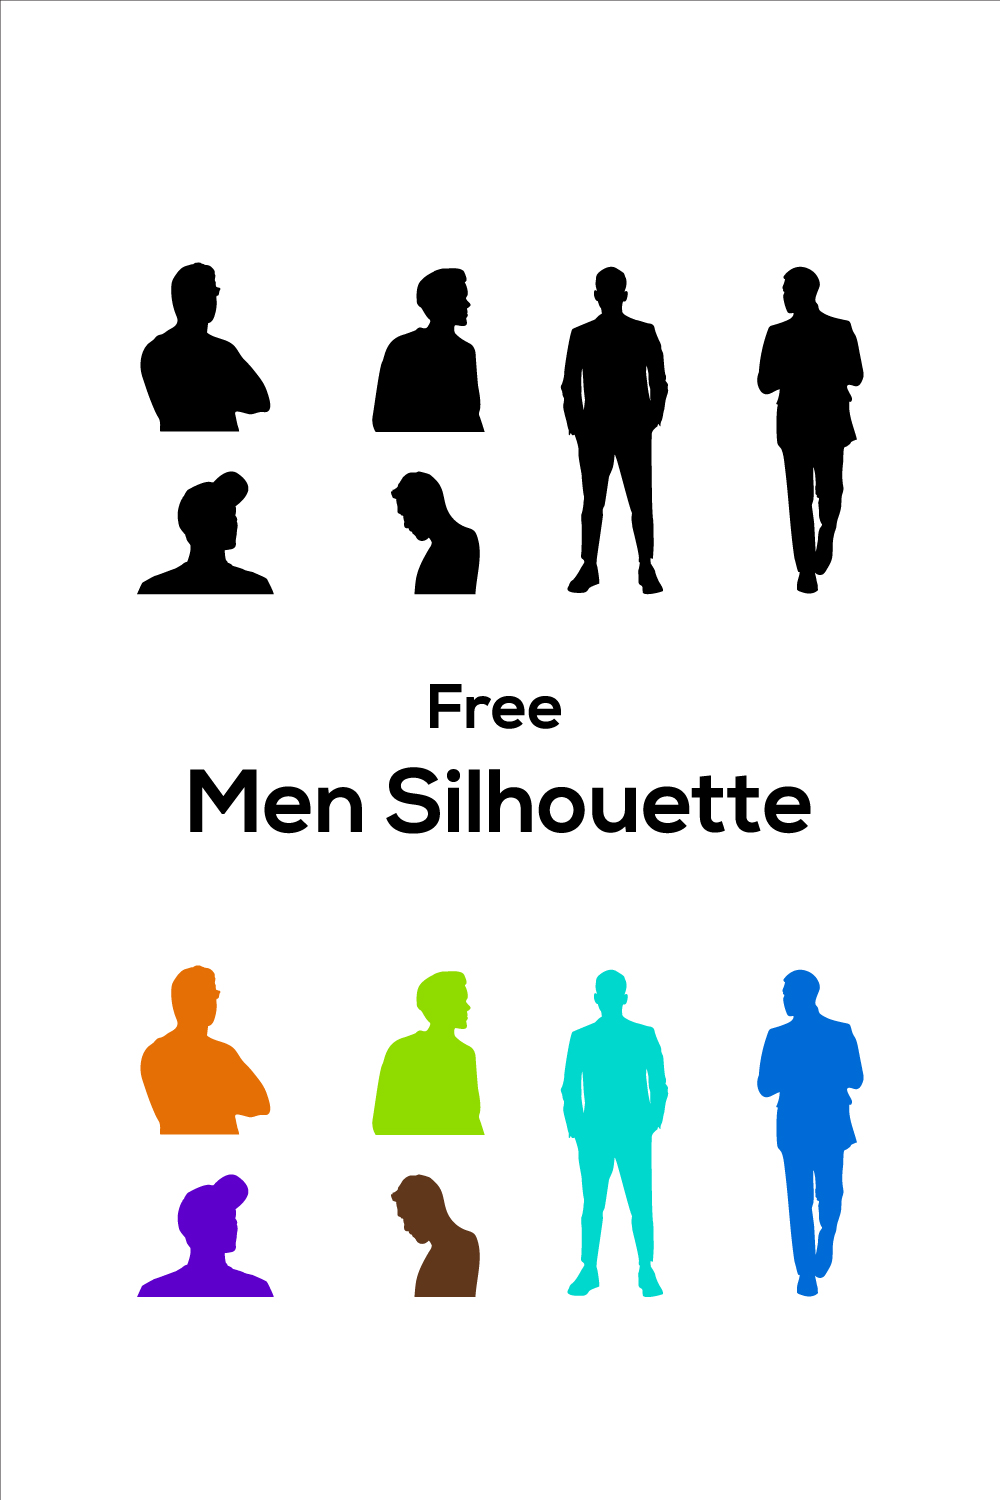 39,260 Men Finger Pointing Pose Images, Stock Photos, 3D objects, & Vectors  | Shutterstock